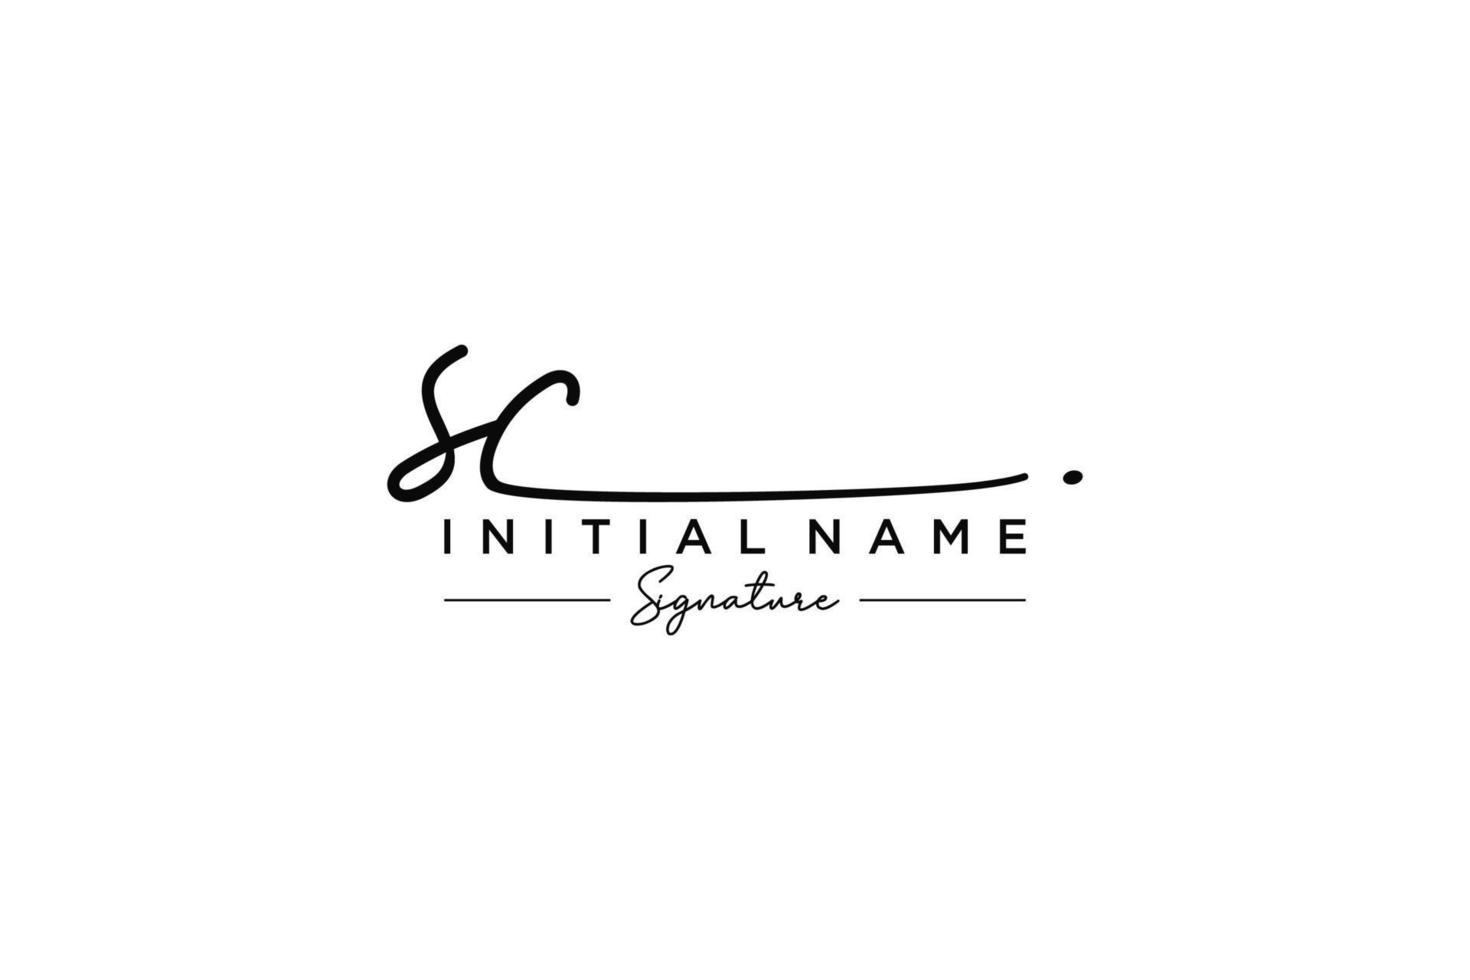 Initial SC signature logo template vector. Hand drawn Calligraphy lettering Vector illustration.